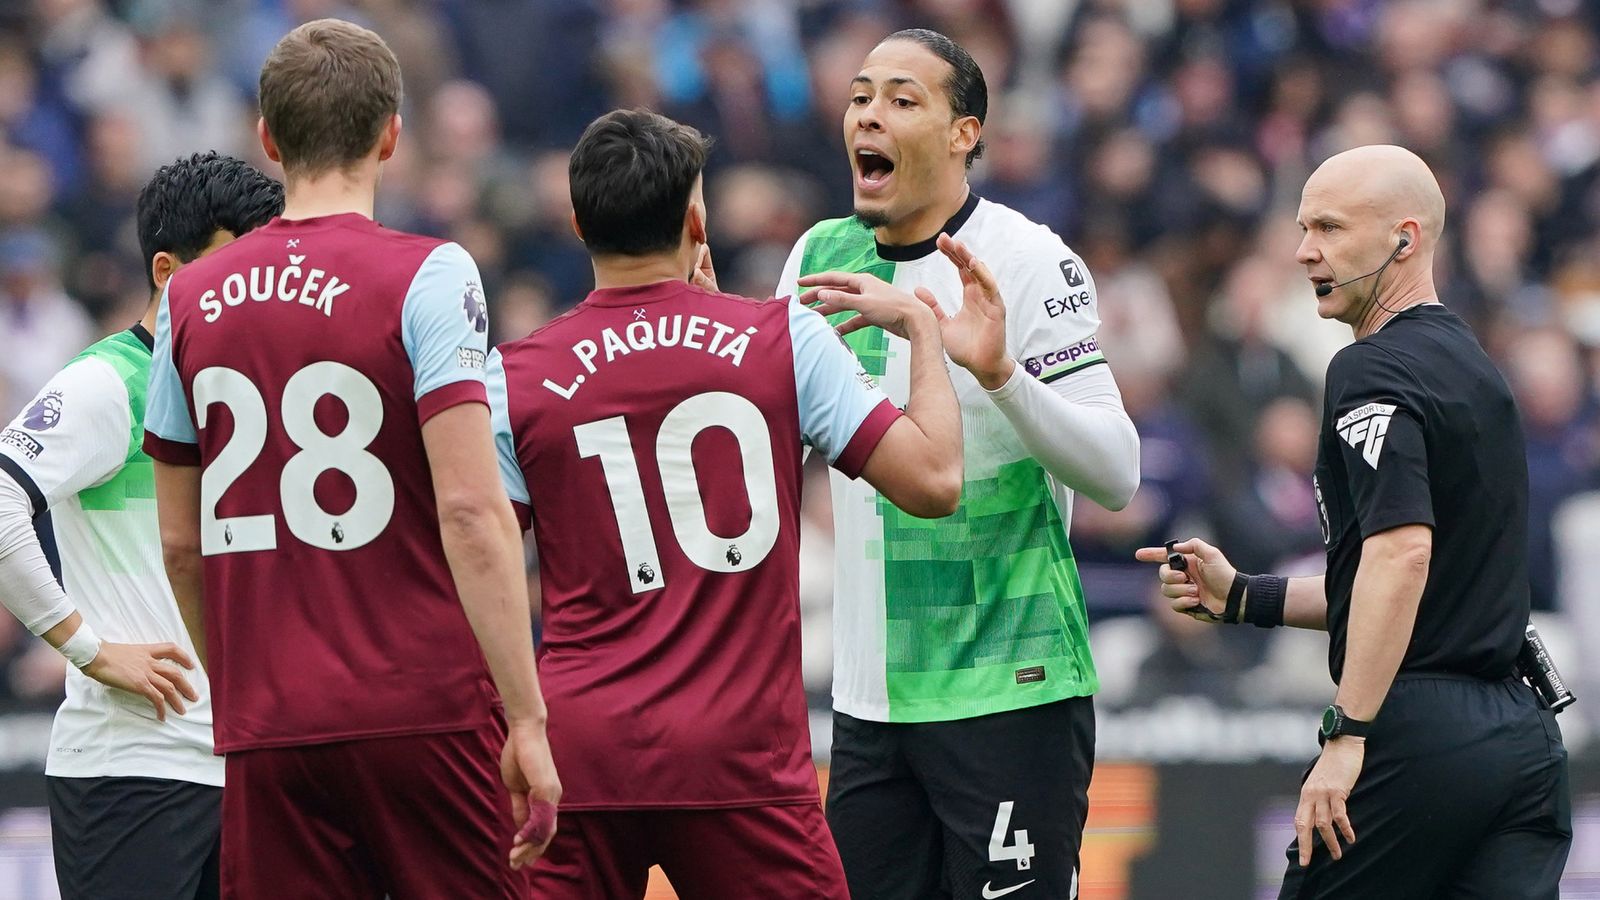 West Ham 2-2 Liverpool: Reds' Premier League title hopes in tatters after Michail Antonio equaliser